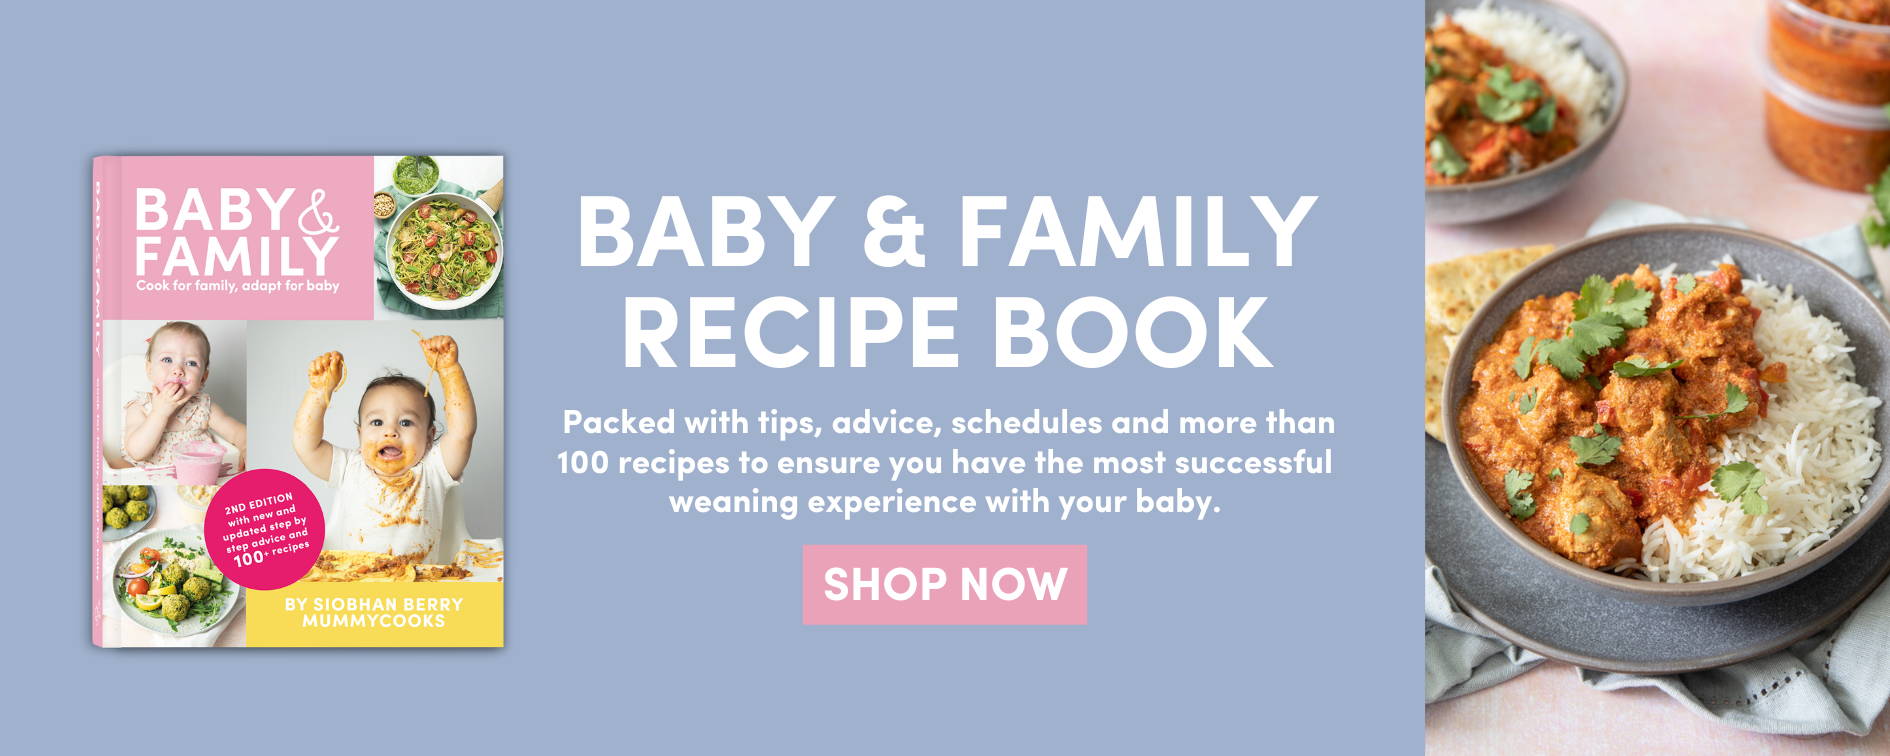 Lunchbox Made Easy Recipe Book by Siobhan Berry